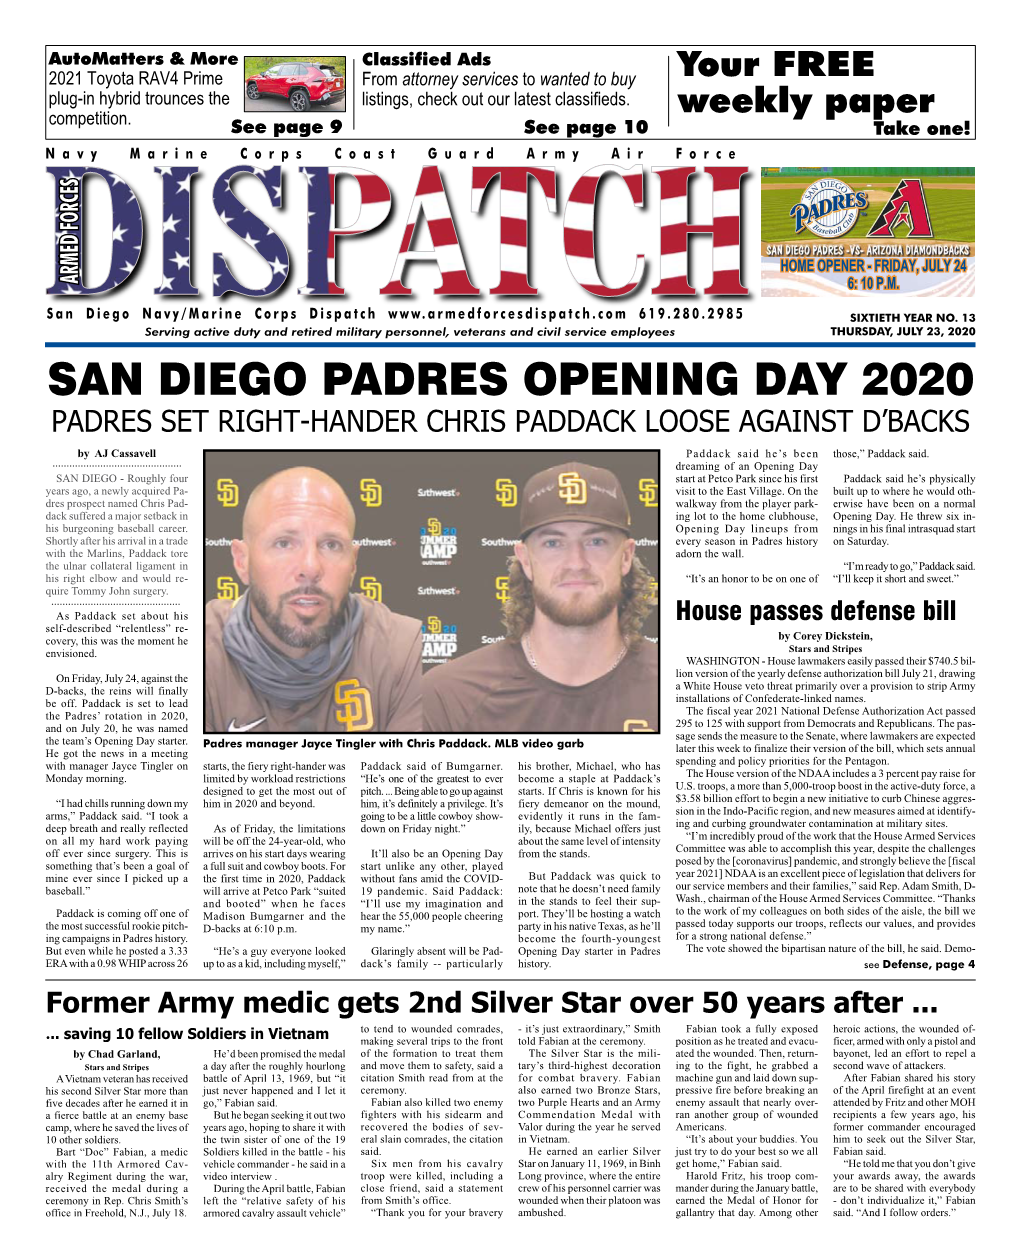 SAN DIEGO PADRES OPENING DAY 2020 PADRES SET RIGHT-HANDER CHRIS PADDACK LOOSE AGAINST D’BACKS by AJ Cassavell Paddack Said He’S Been Those,” Paddack Said